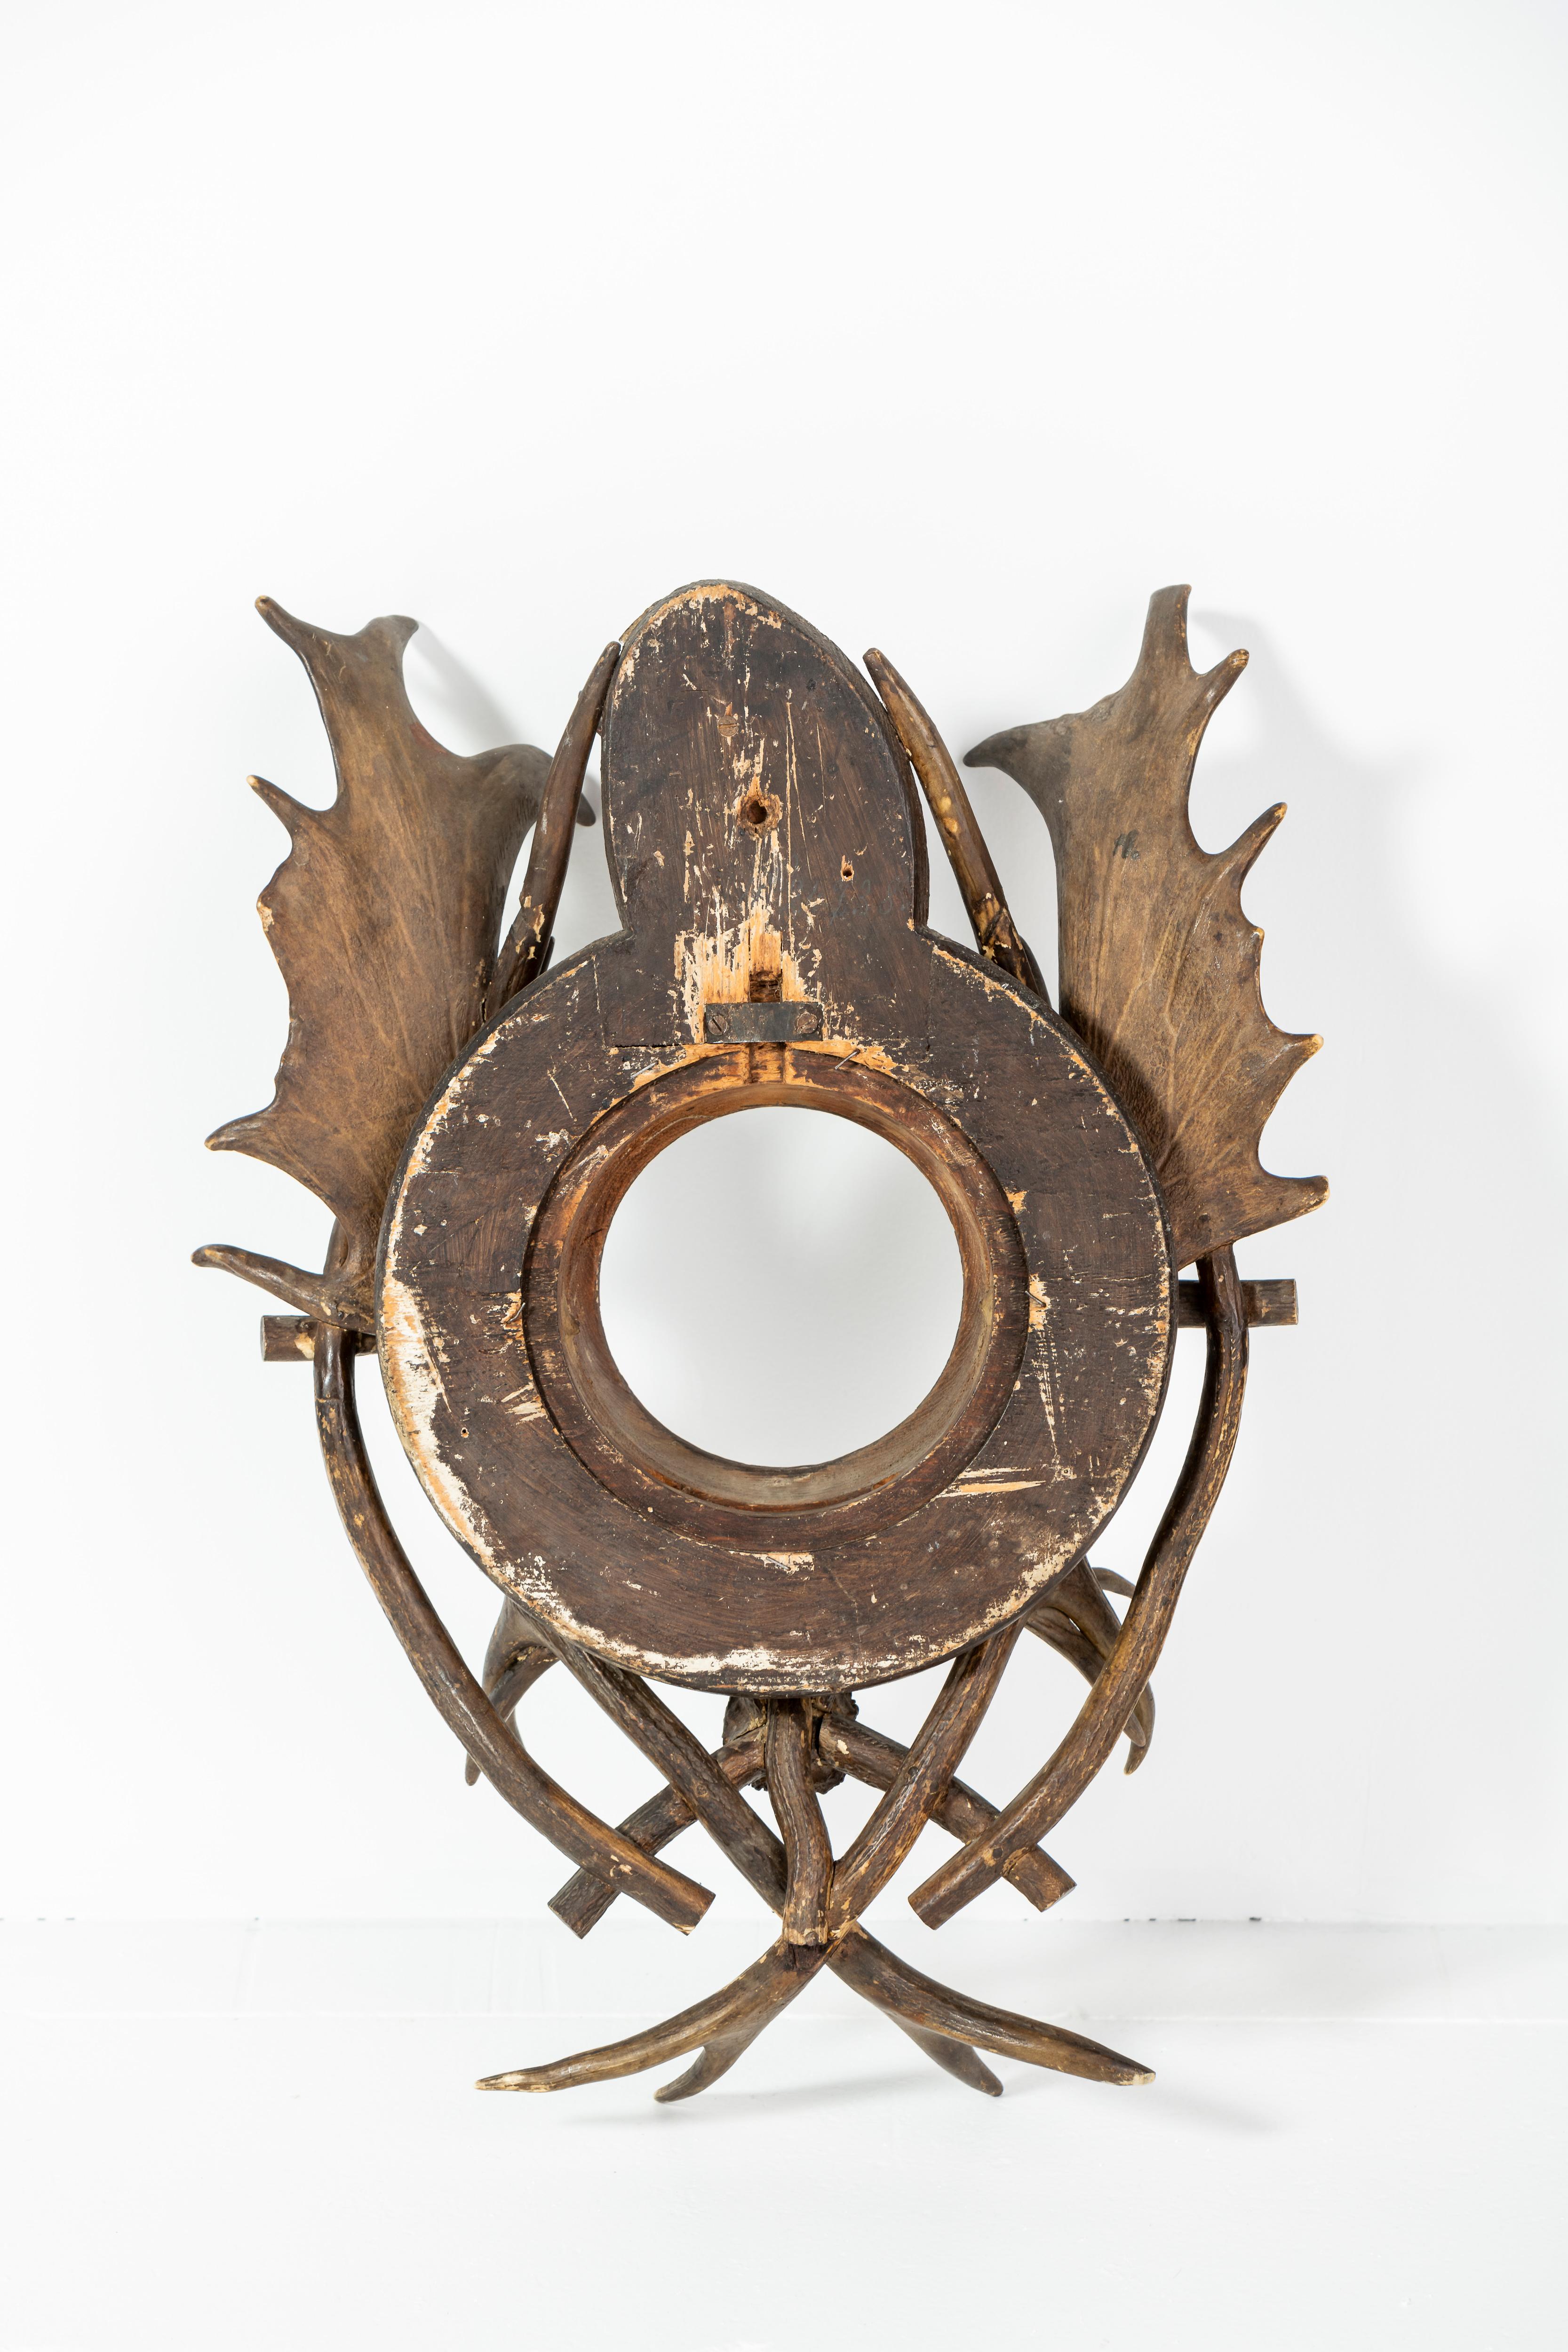 Handmade mirror from wood and antlers - likely European.